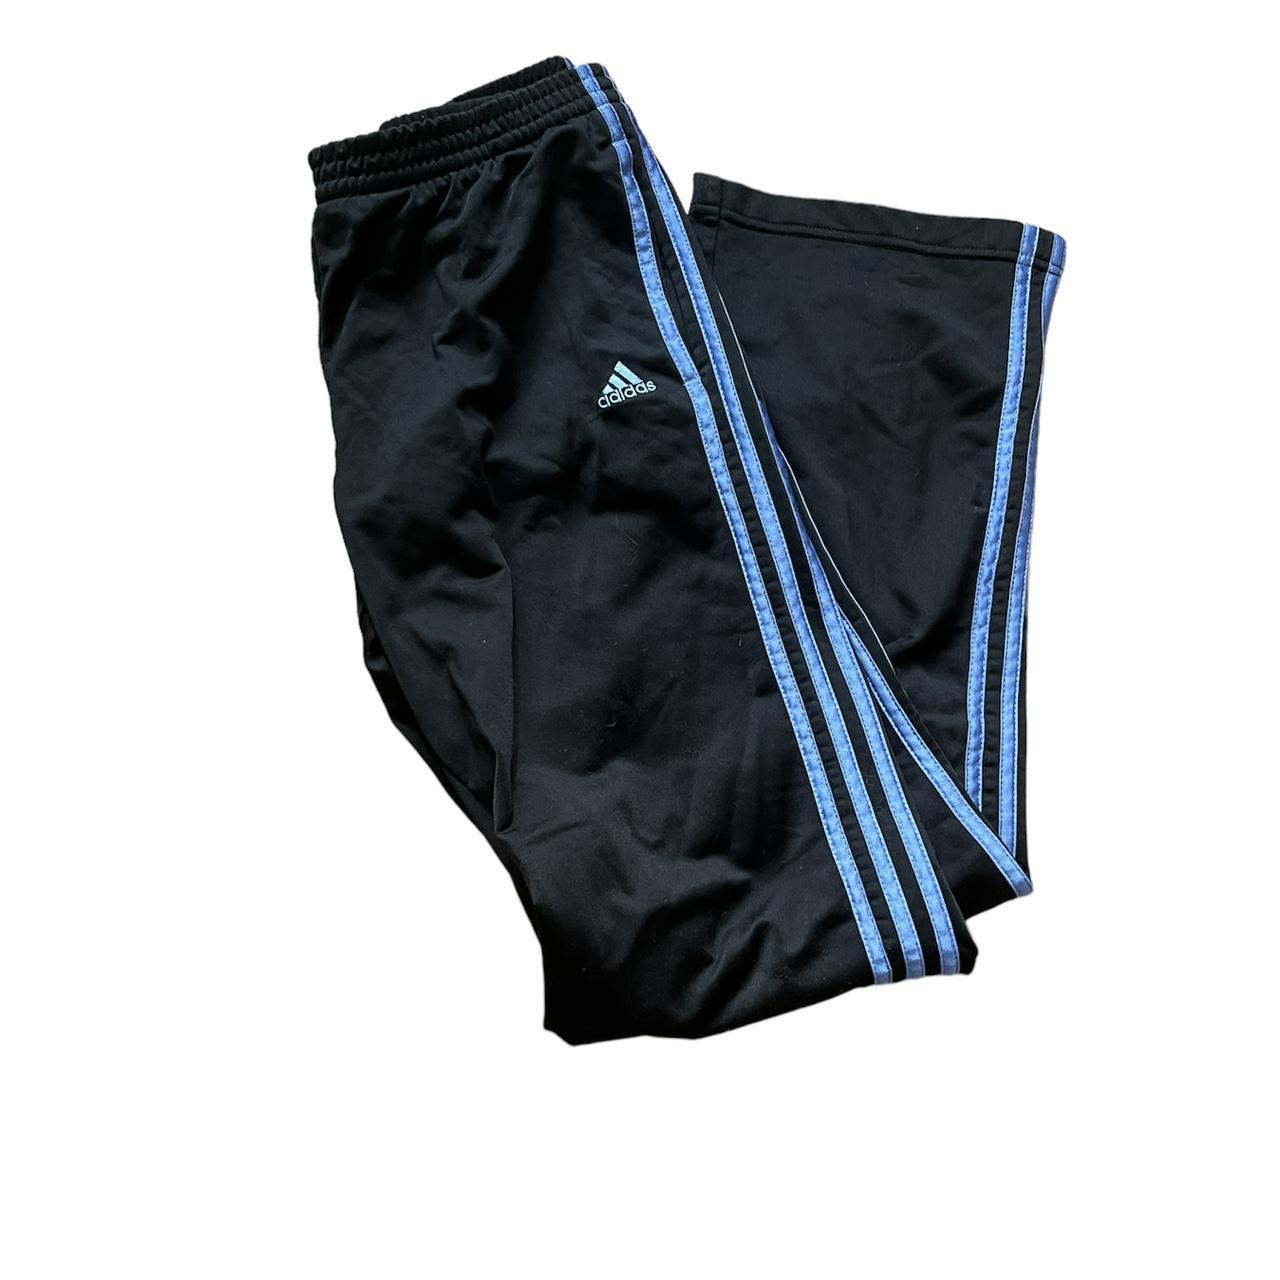 Adidas Women's Black and Blue Joggers-tracksuits